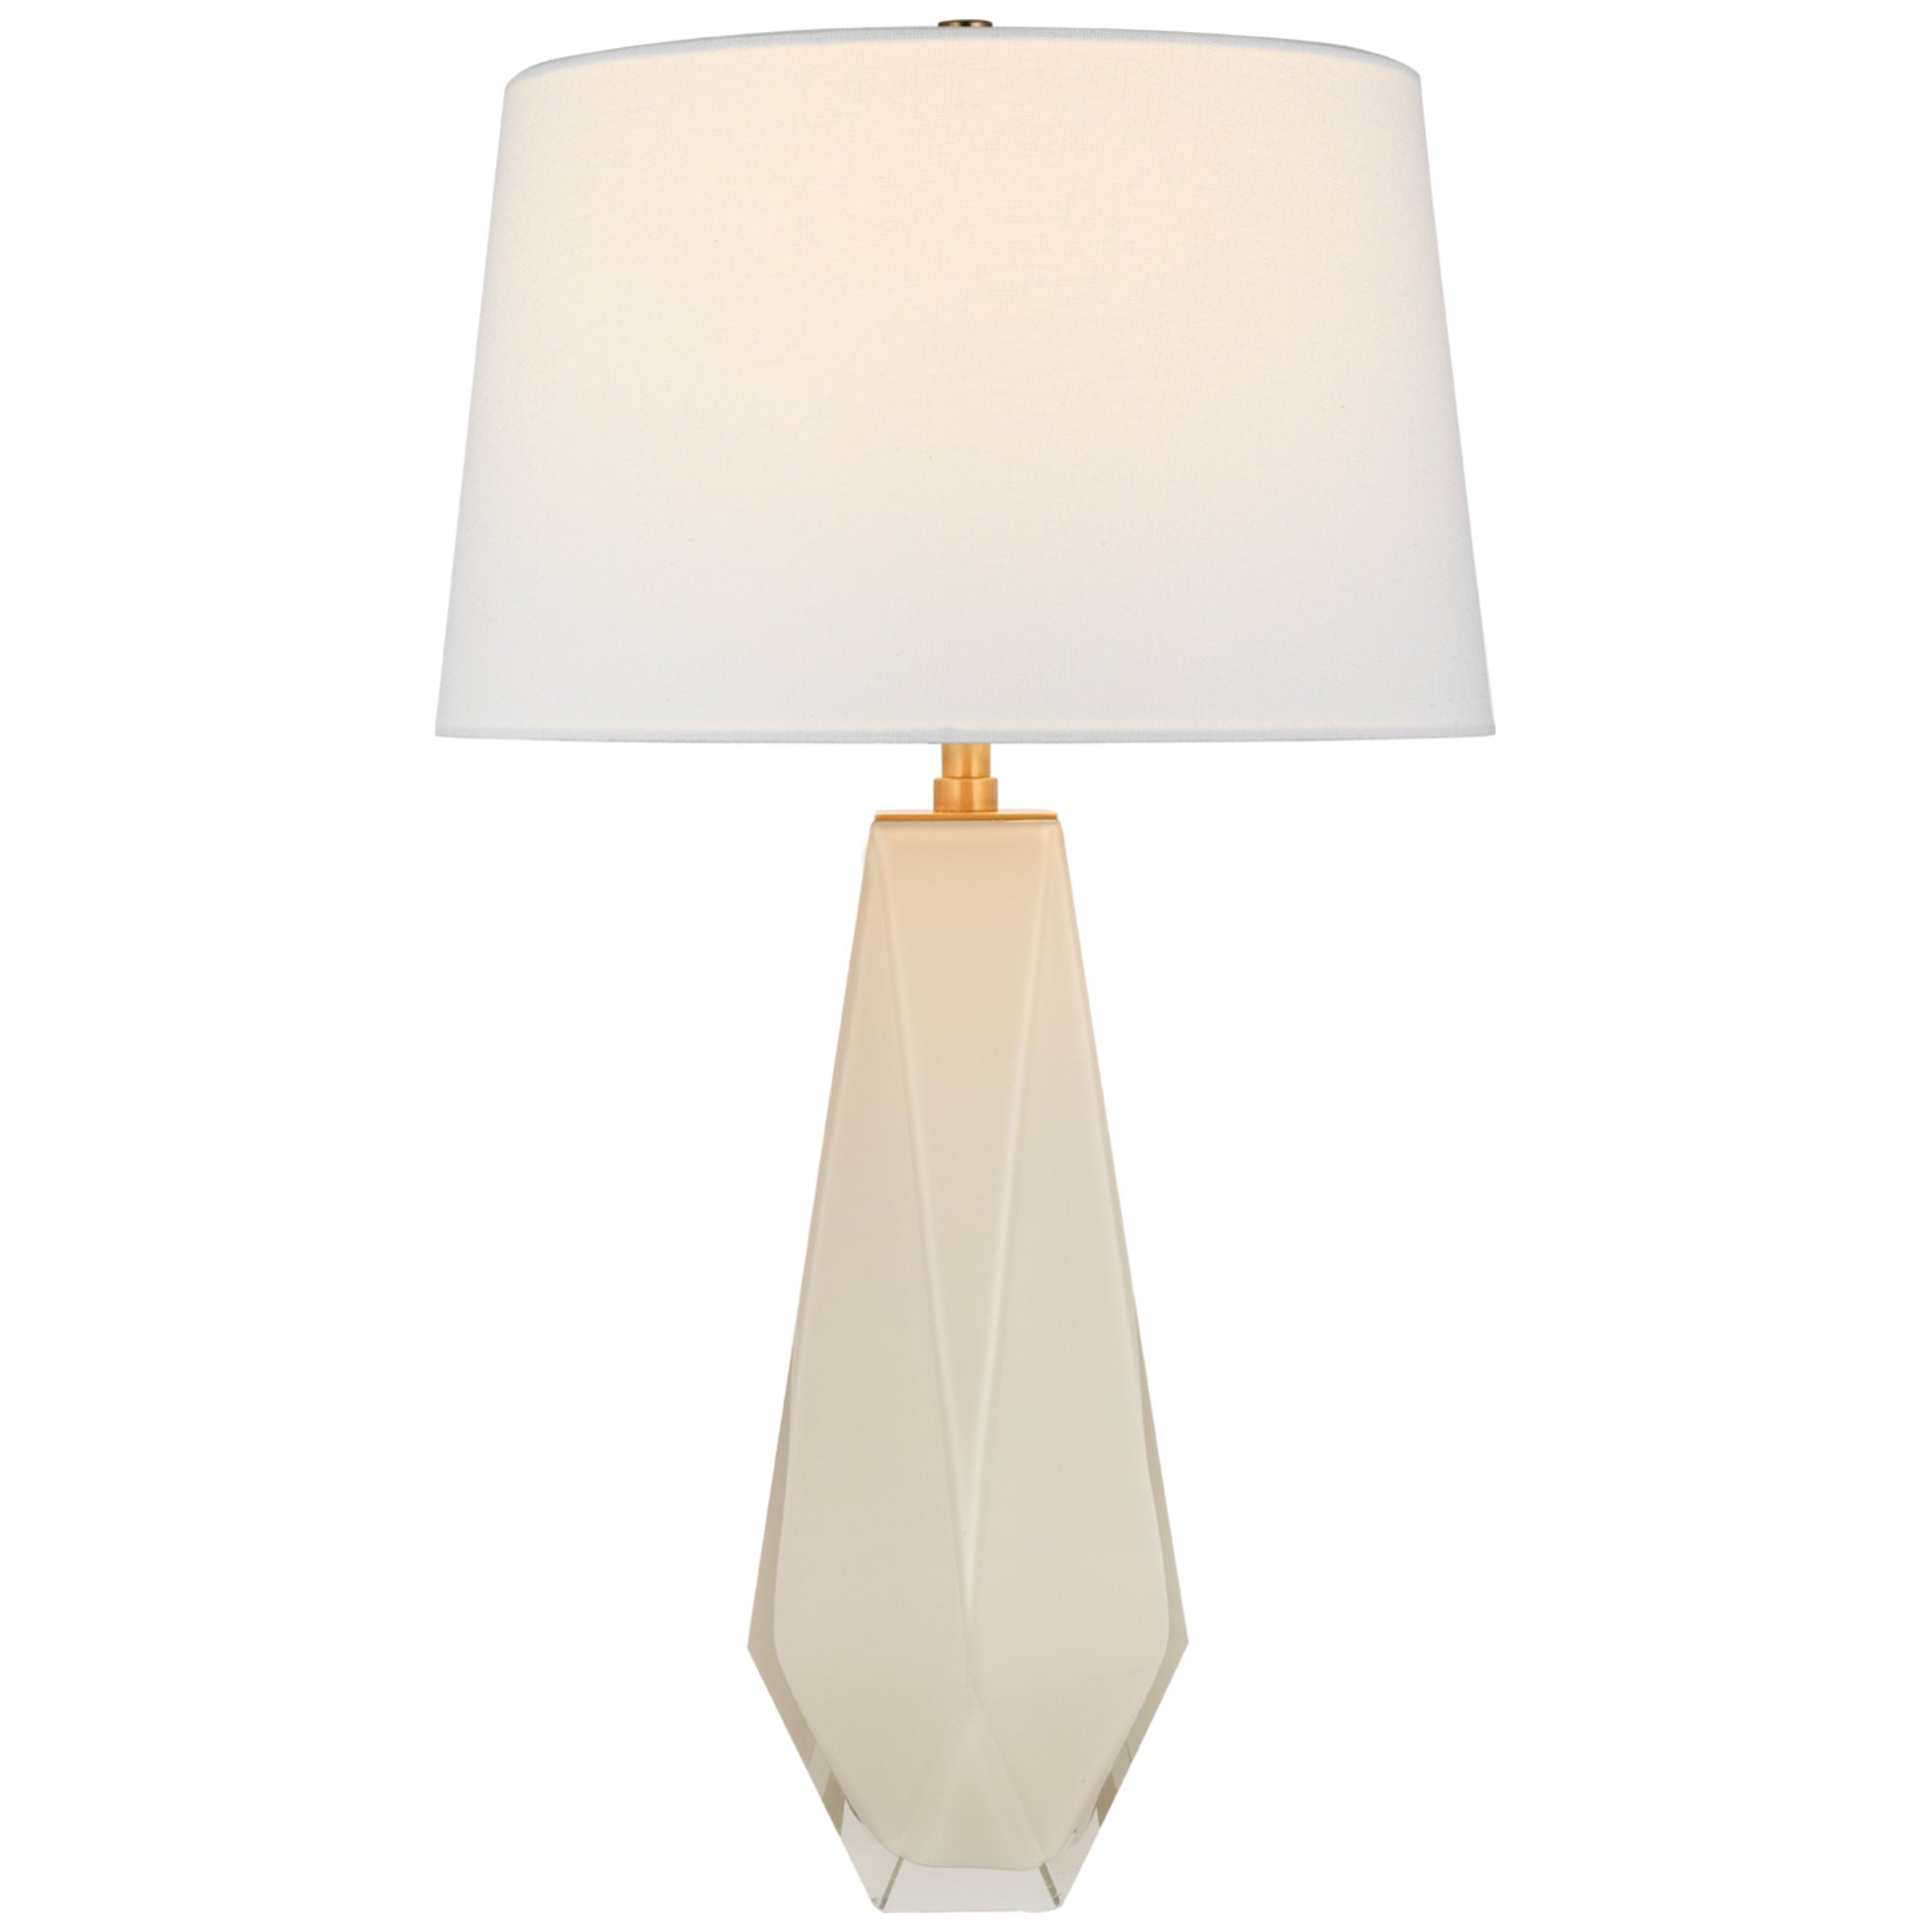 Chapman & Myers Gemma Medium Table Lamp in White Glass with Linen Shade